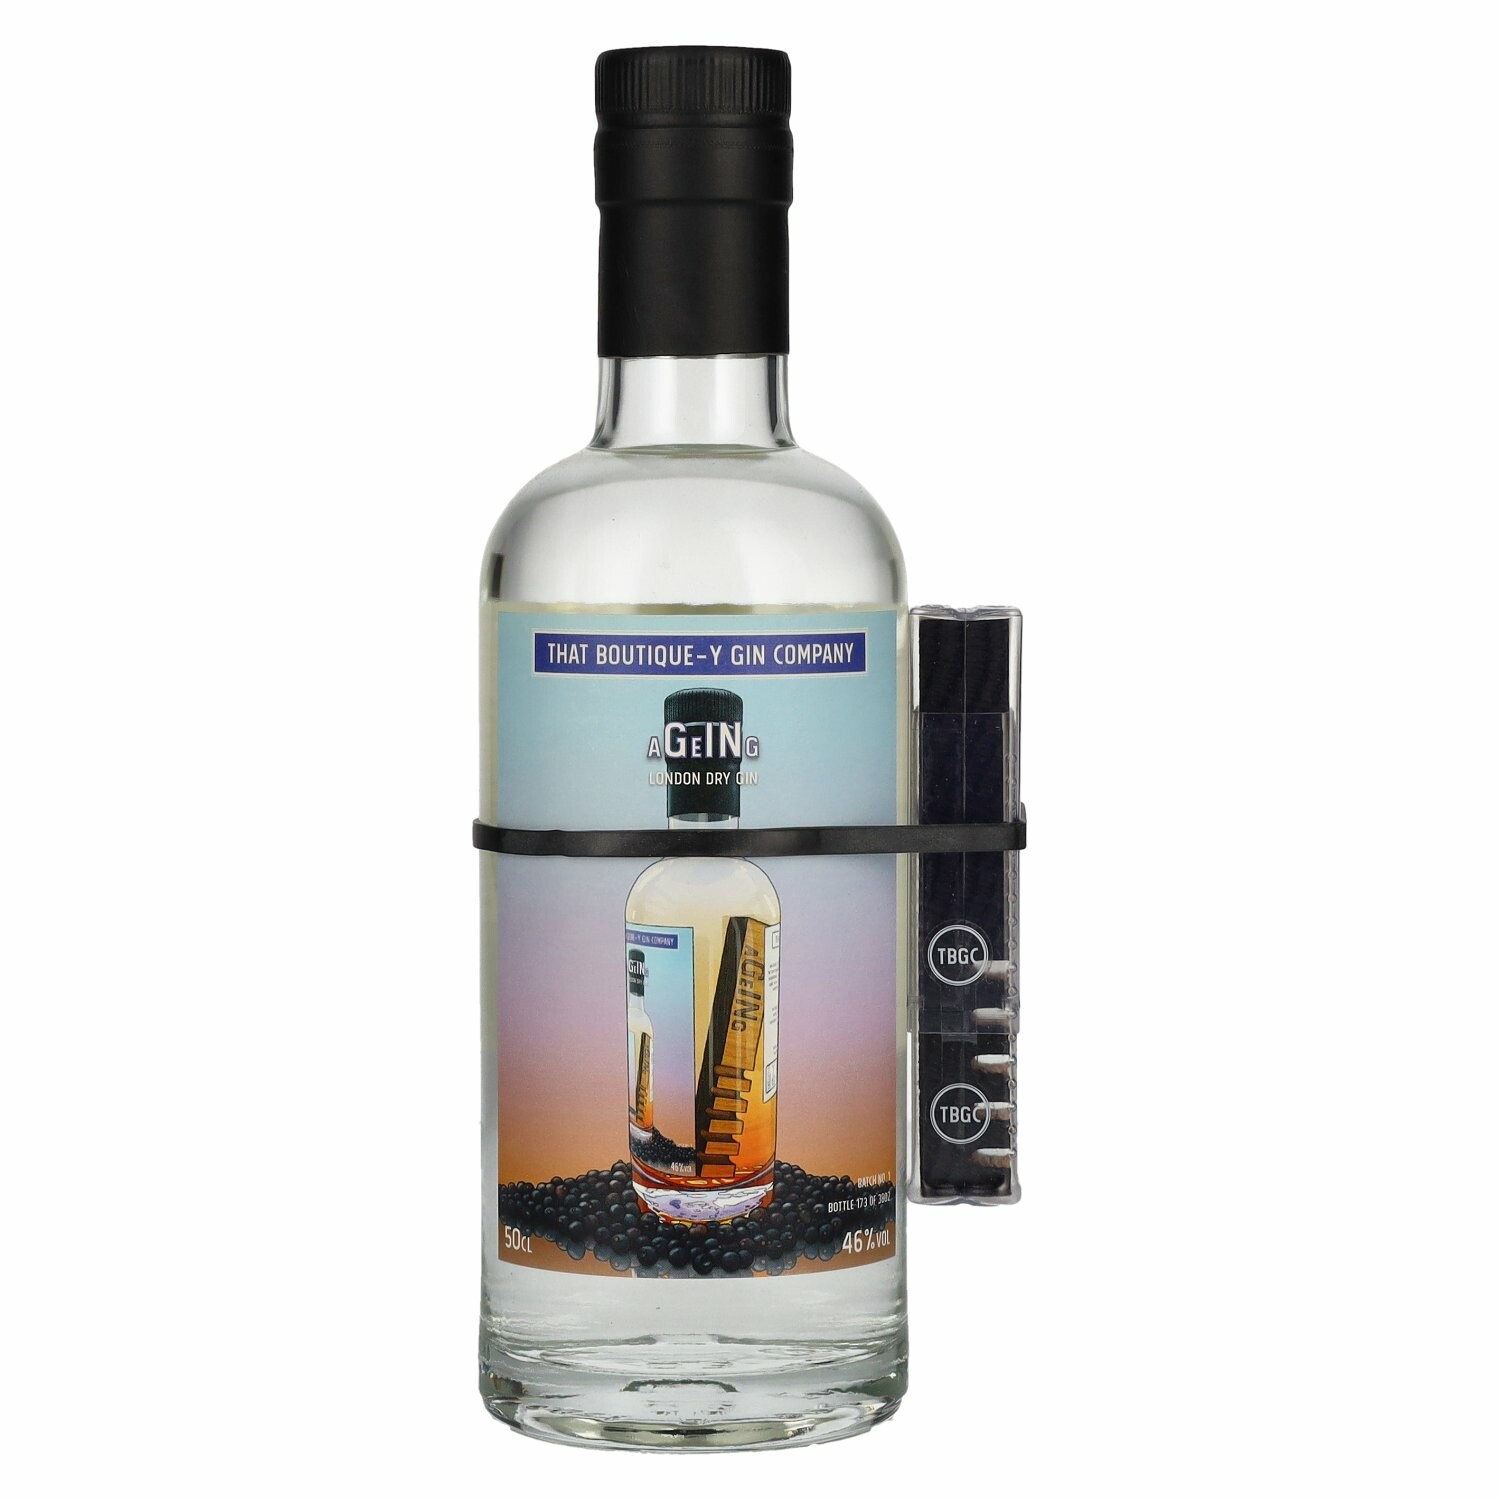 That Boutique-y Gin Company aGeINg London Dry Gin 46% Vol. 0,5l